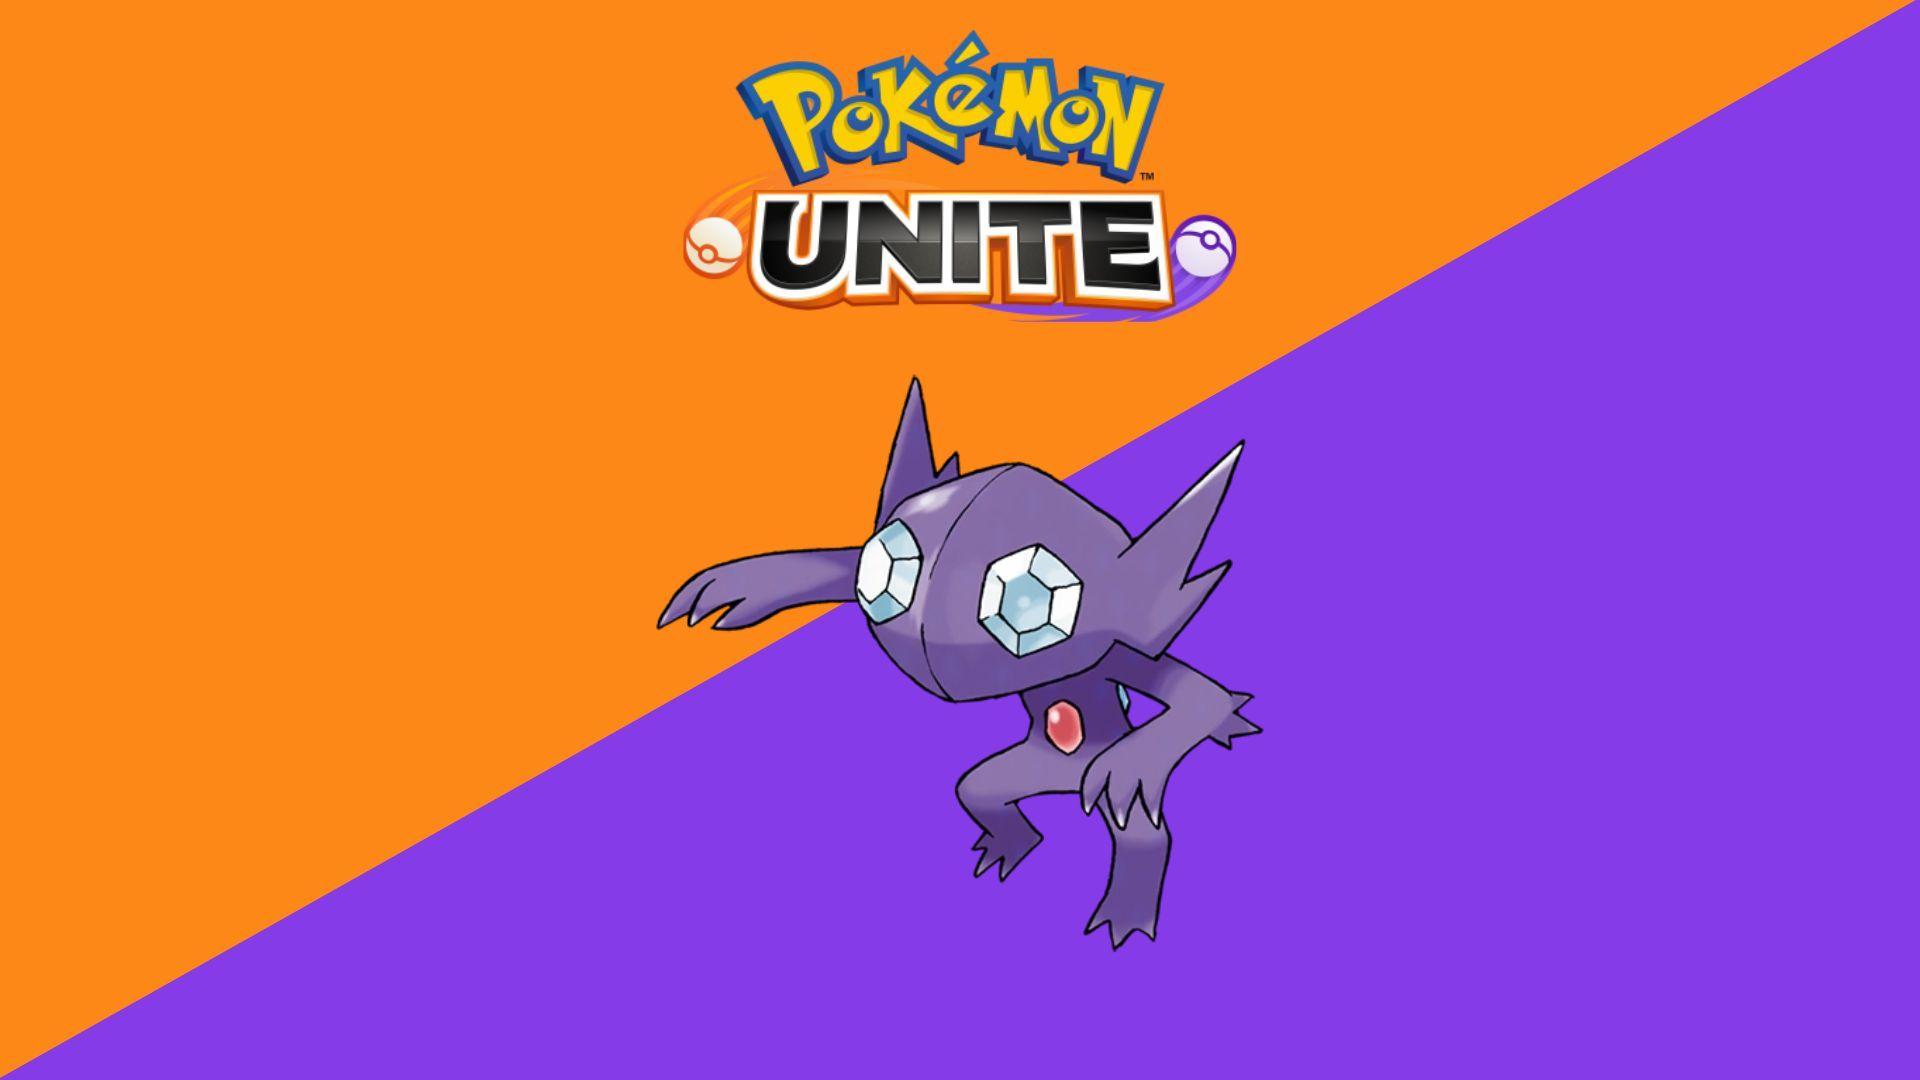 Mew revealed in Pokemon Unite: Moves, stats, release date, guide, build -  Dexerto